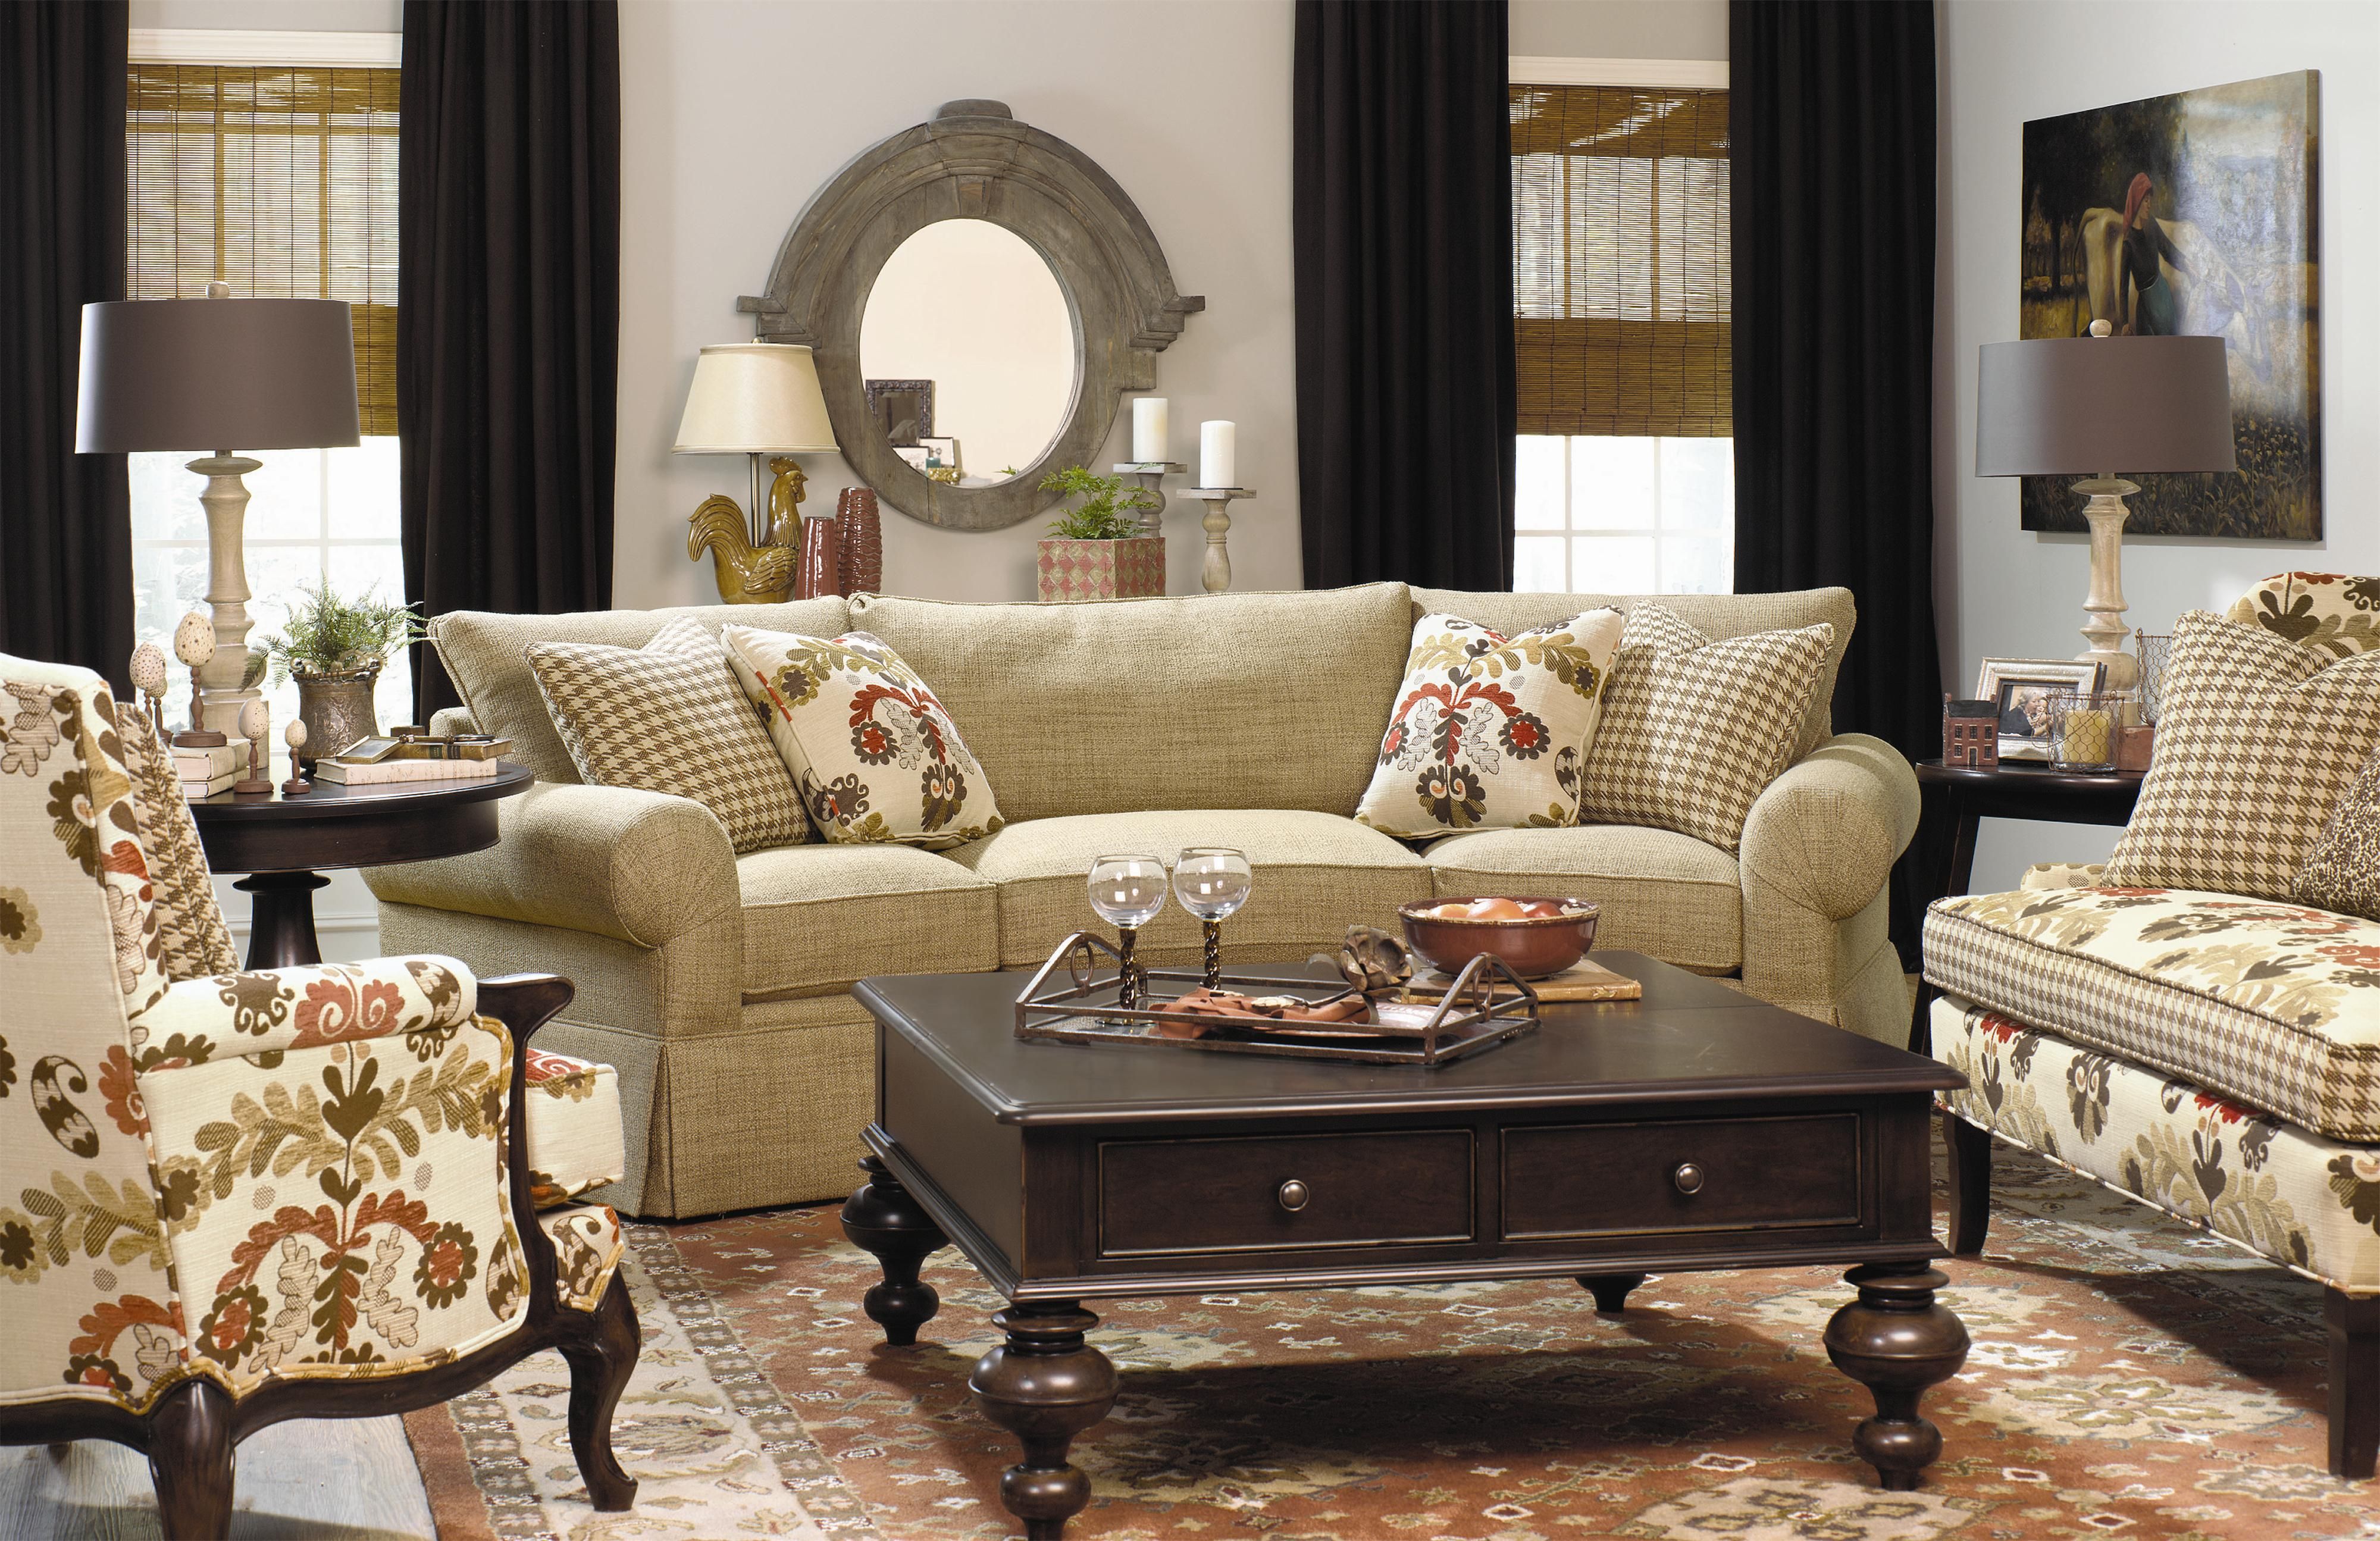 Traditional Living Room Furniture: Classic Pieces For A Timeless Look